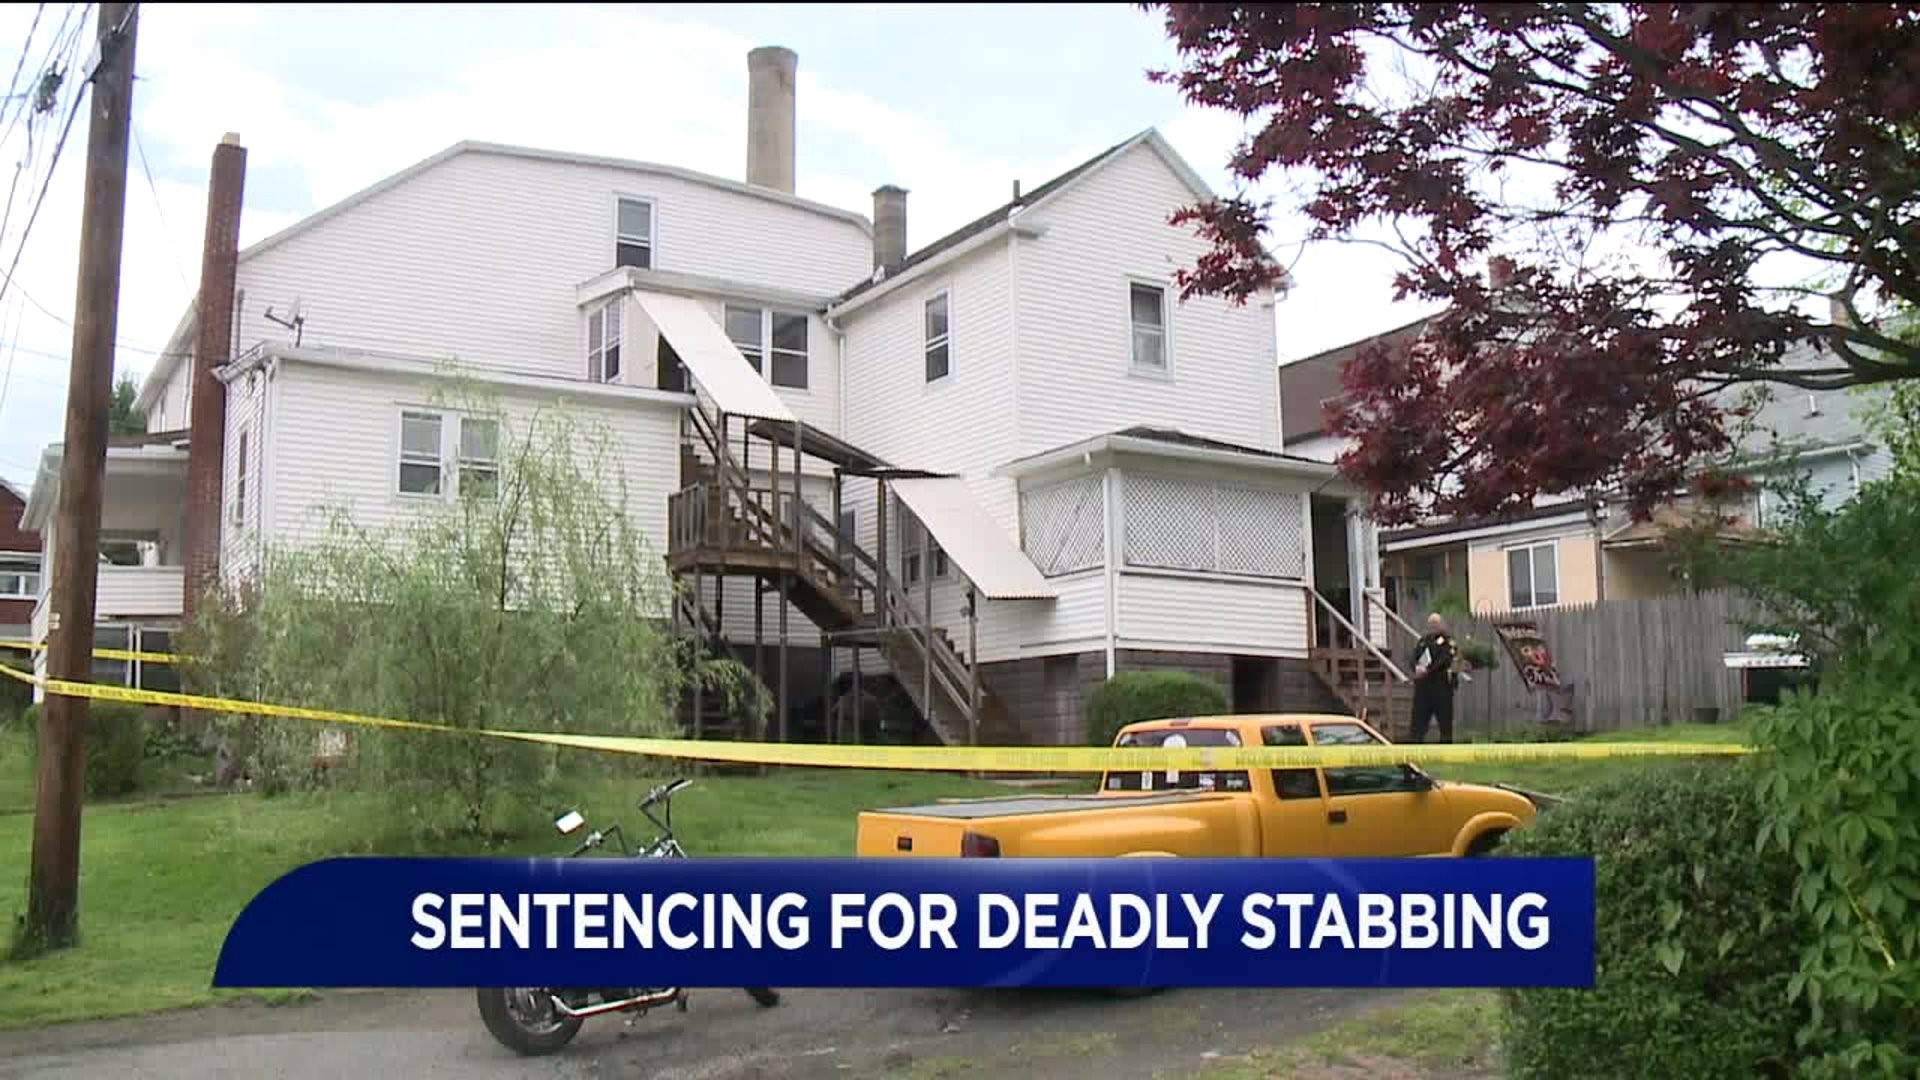 House Arrest for Luzerne County Woman After Deadly Stabbing